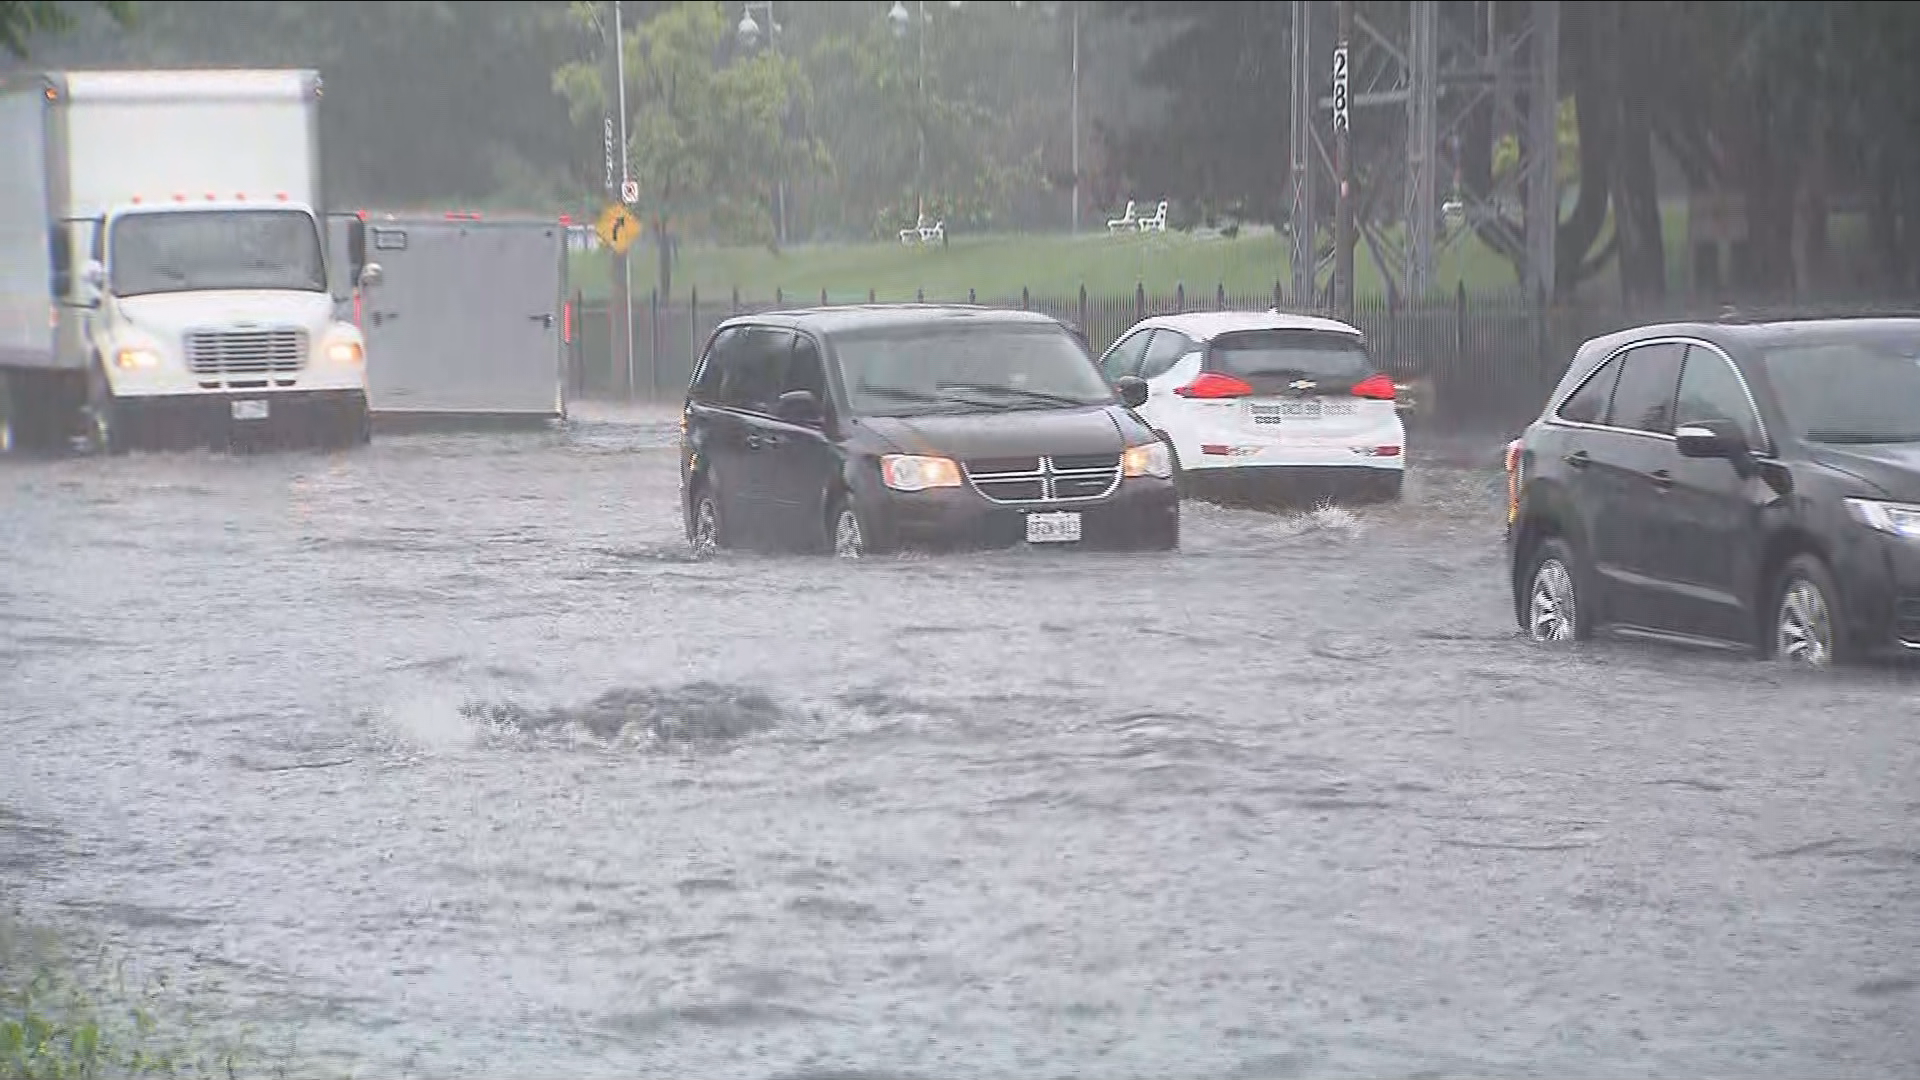 Toronto flooding: Pictures, videos show heavy rainfall today in downtown core